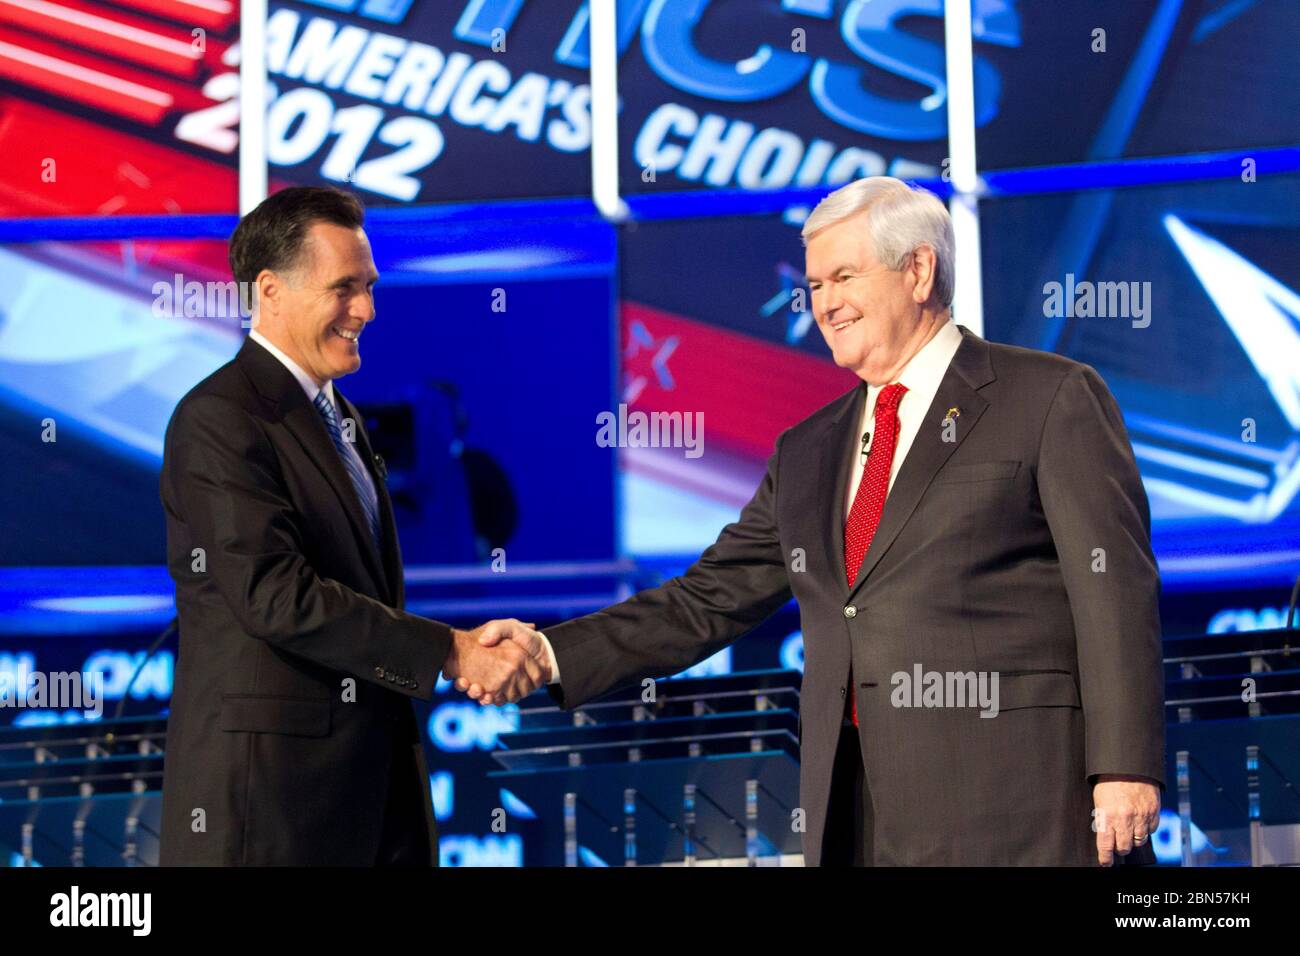 North Charleston South Caroline USA, January 19 2012: Mitt Romney, left,  shakes hands with Newt Gingrich as the remaining candidates for the Republican presidential nomination appear together at a debate televised on CNN. © Bob Daemmrich Stock Photo